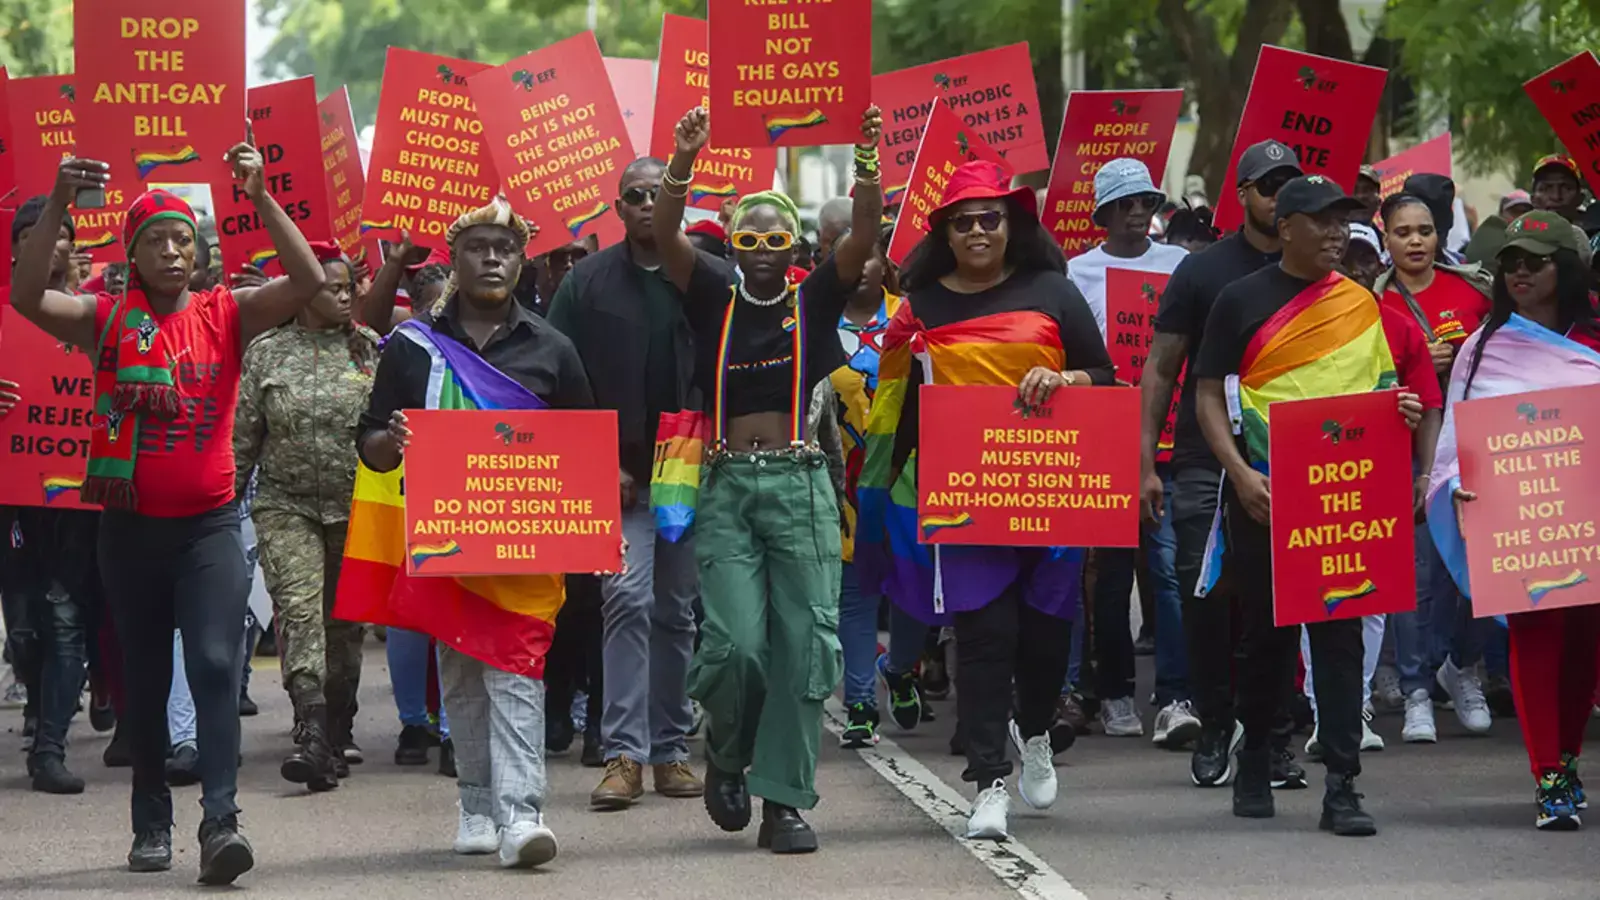 Protesters picket against Uganda’s anti-gay bill at the Uganda High Commission in Pretoria, South Africa.